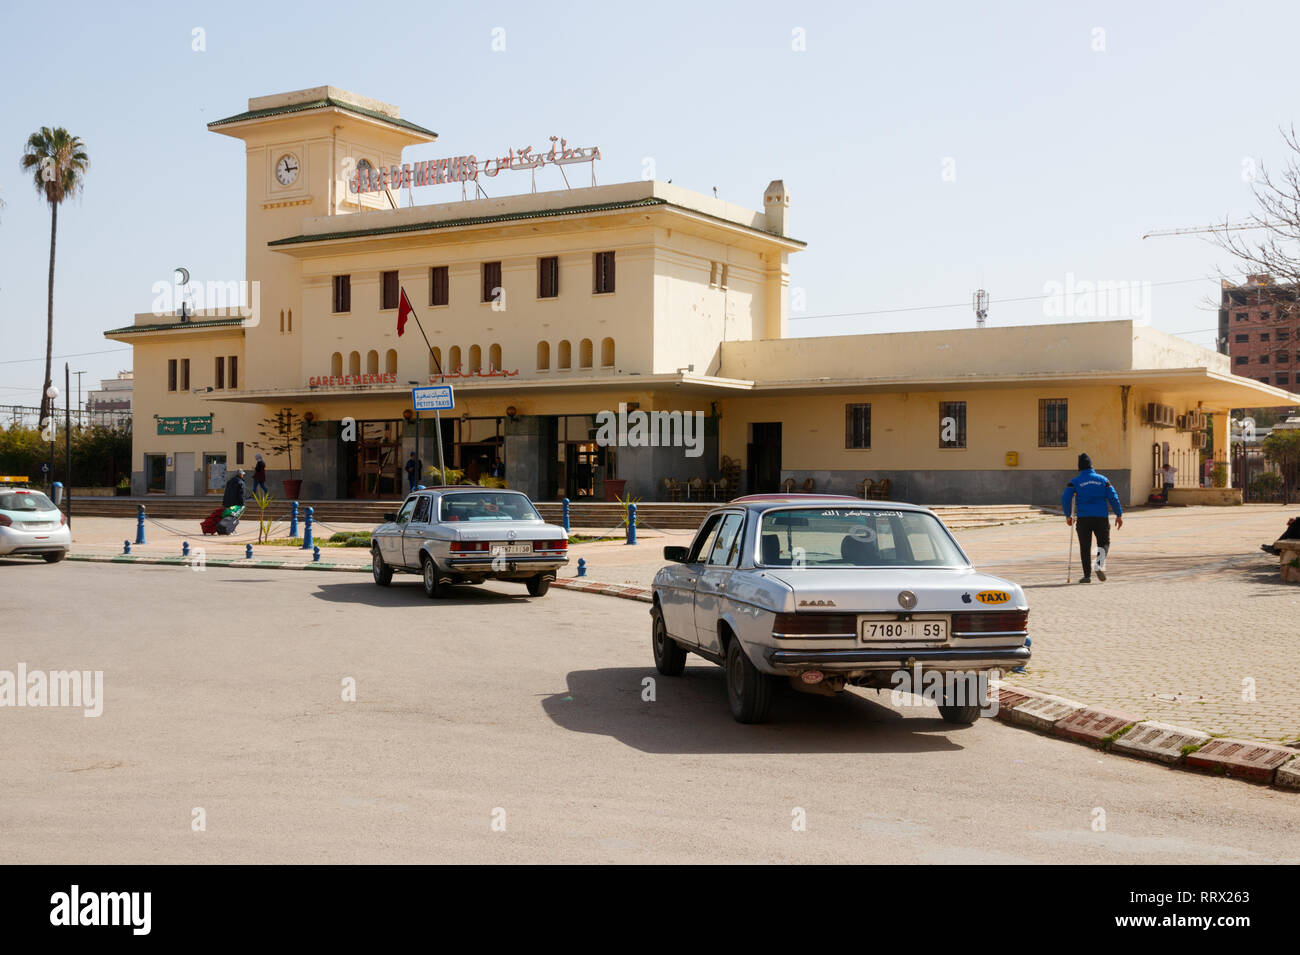 Avenue de la Gare with classic Mercedes taxis and the Meknes Station  building on a sunny day. Meknes, Morocco Stock Photo - Alamy